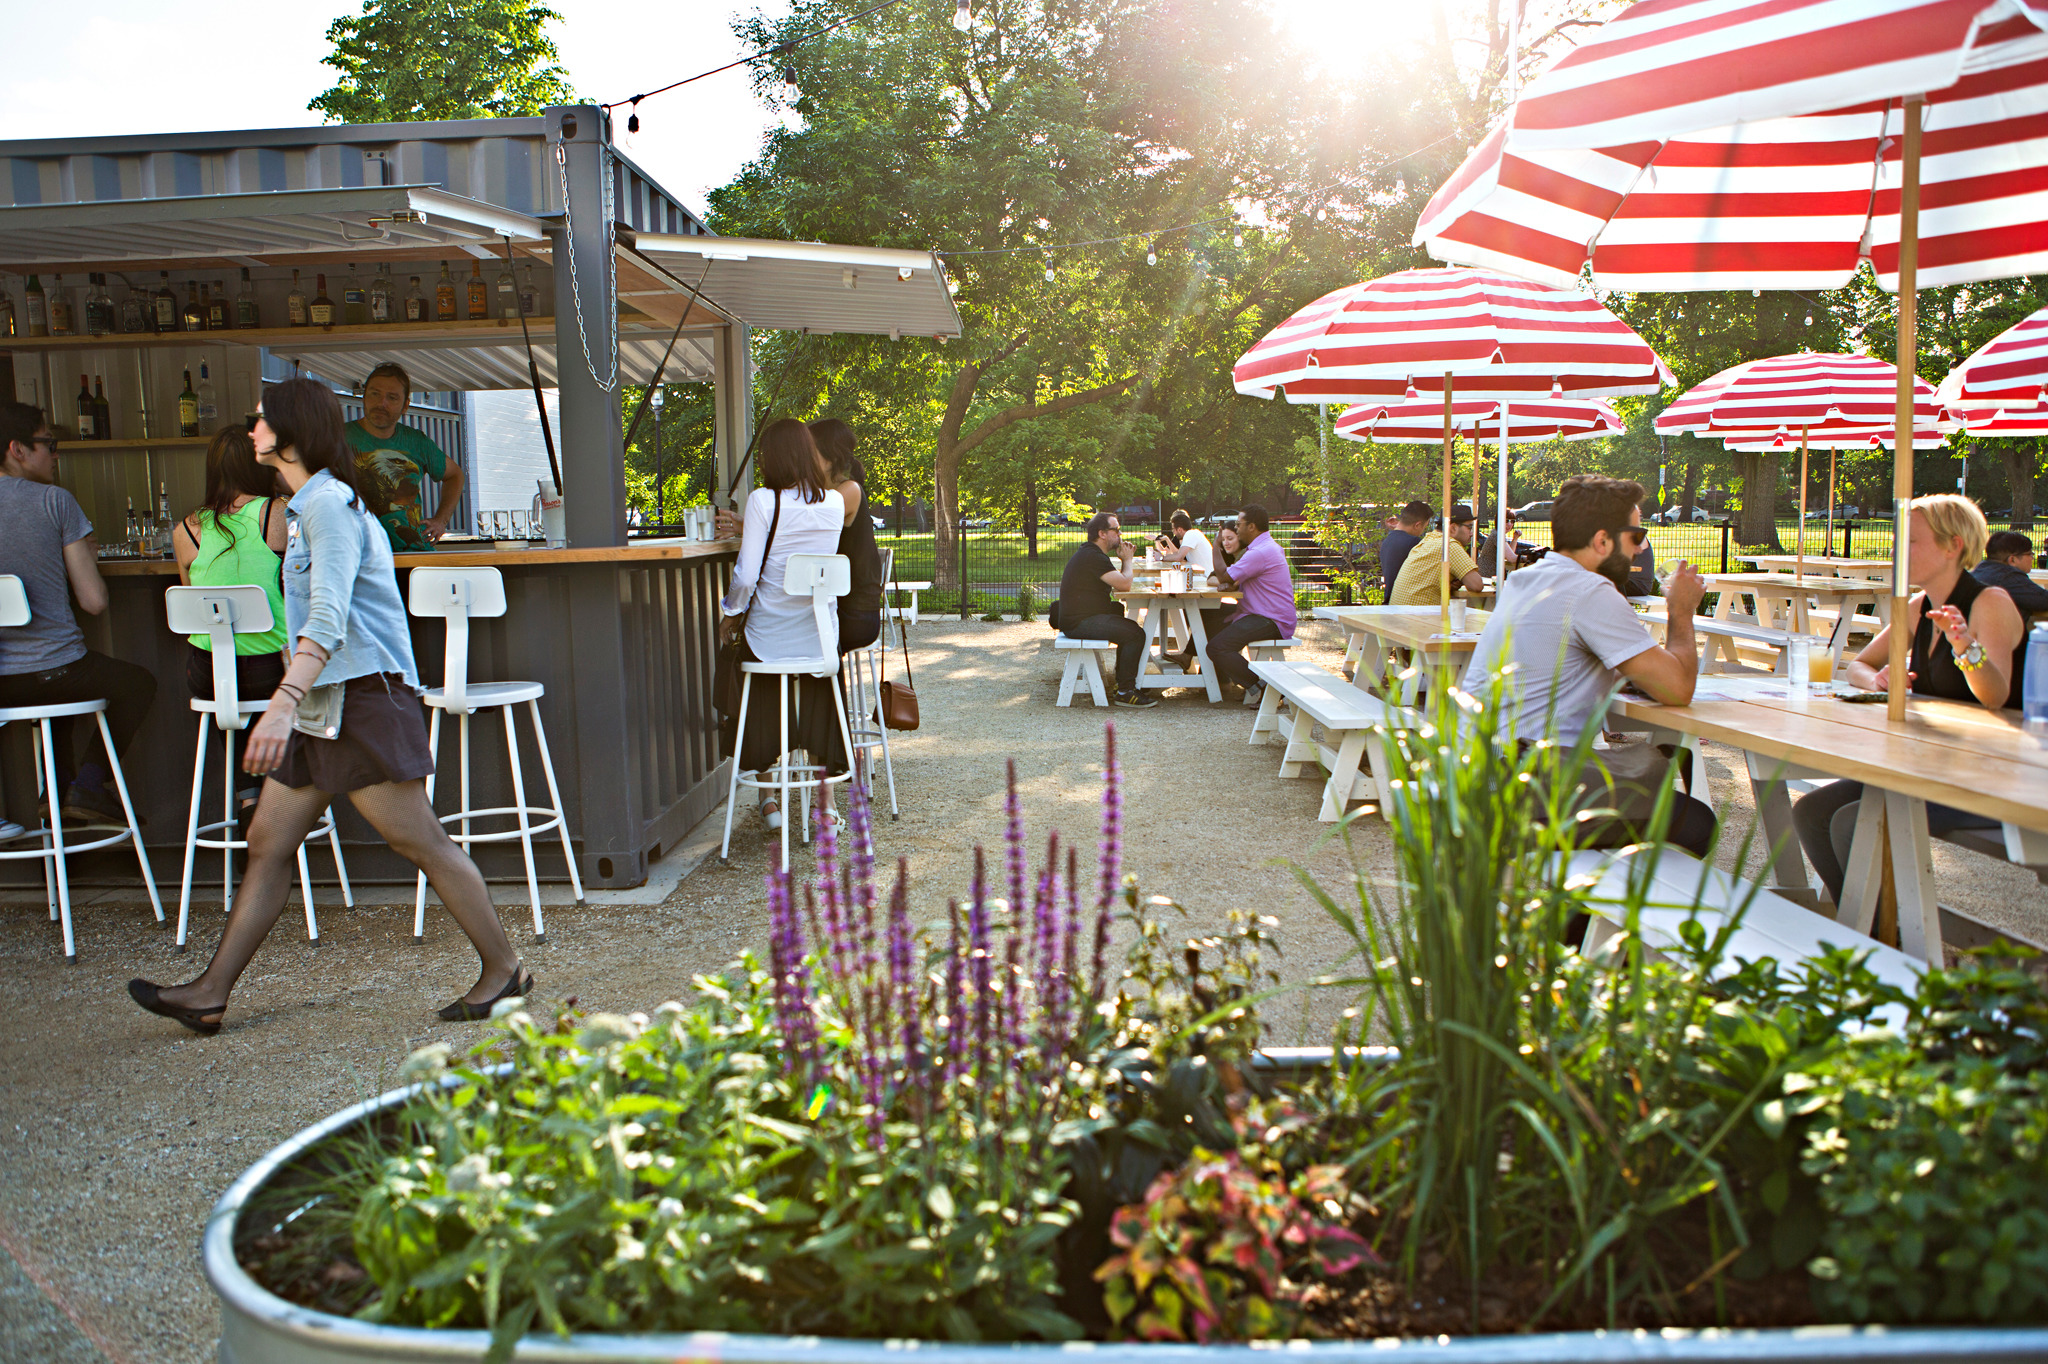 Beer Gardens, Rooftop Bars and Outdoor Dining Spots in Chicago